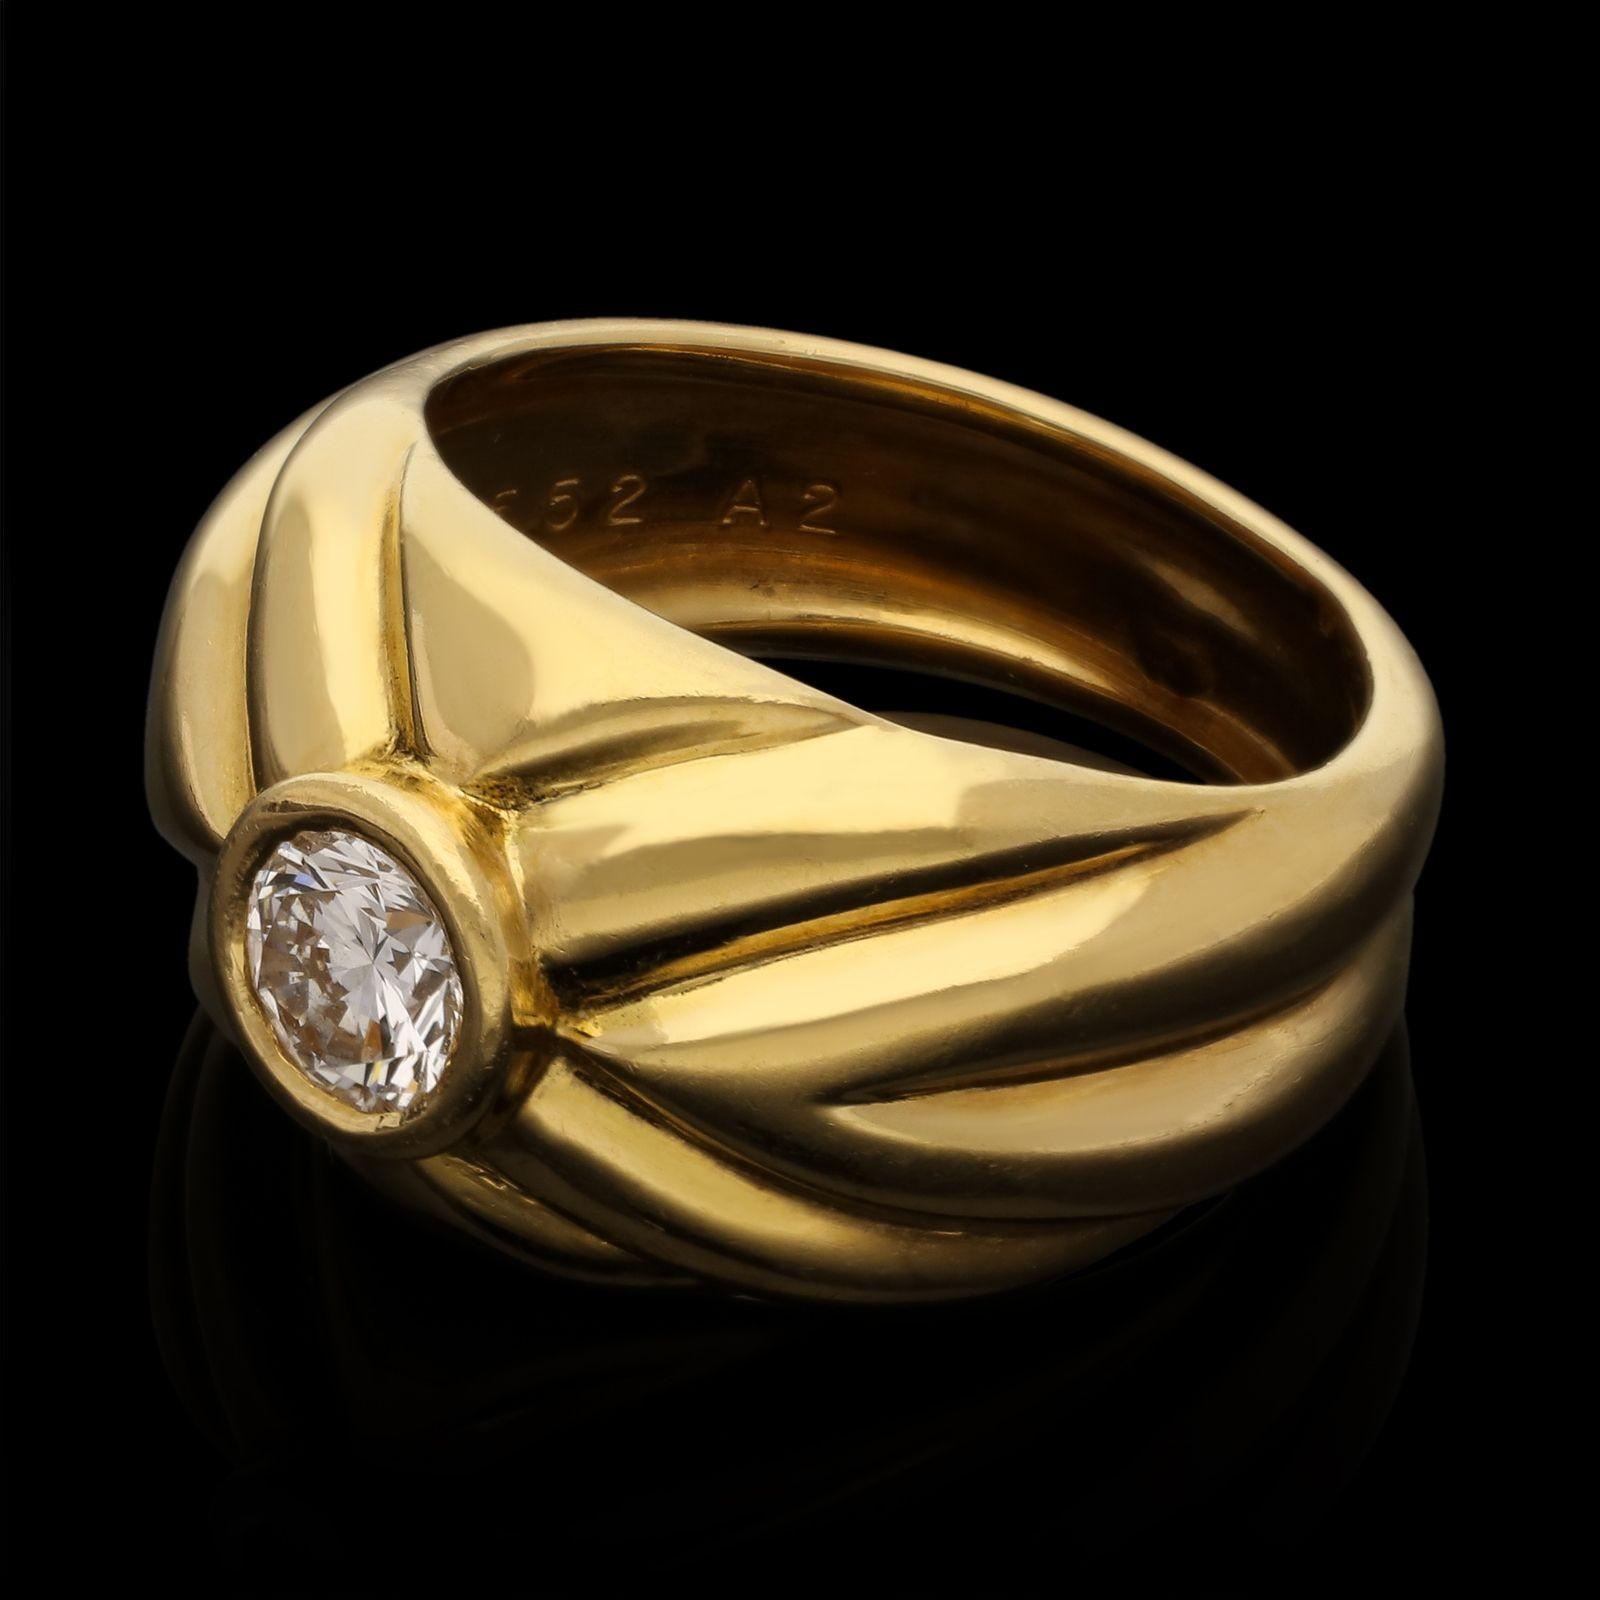 An 18ct gold and diamond ring by Van Cleef & Arpels c.1960s, the domed bombe shape ring in polished 18ct yellow gold has the appearance of fabric that has been pinched together at the centre and then set with a round brilliant cut diamond in bezel